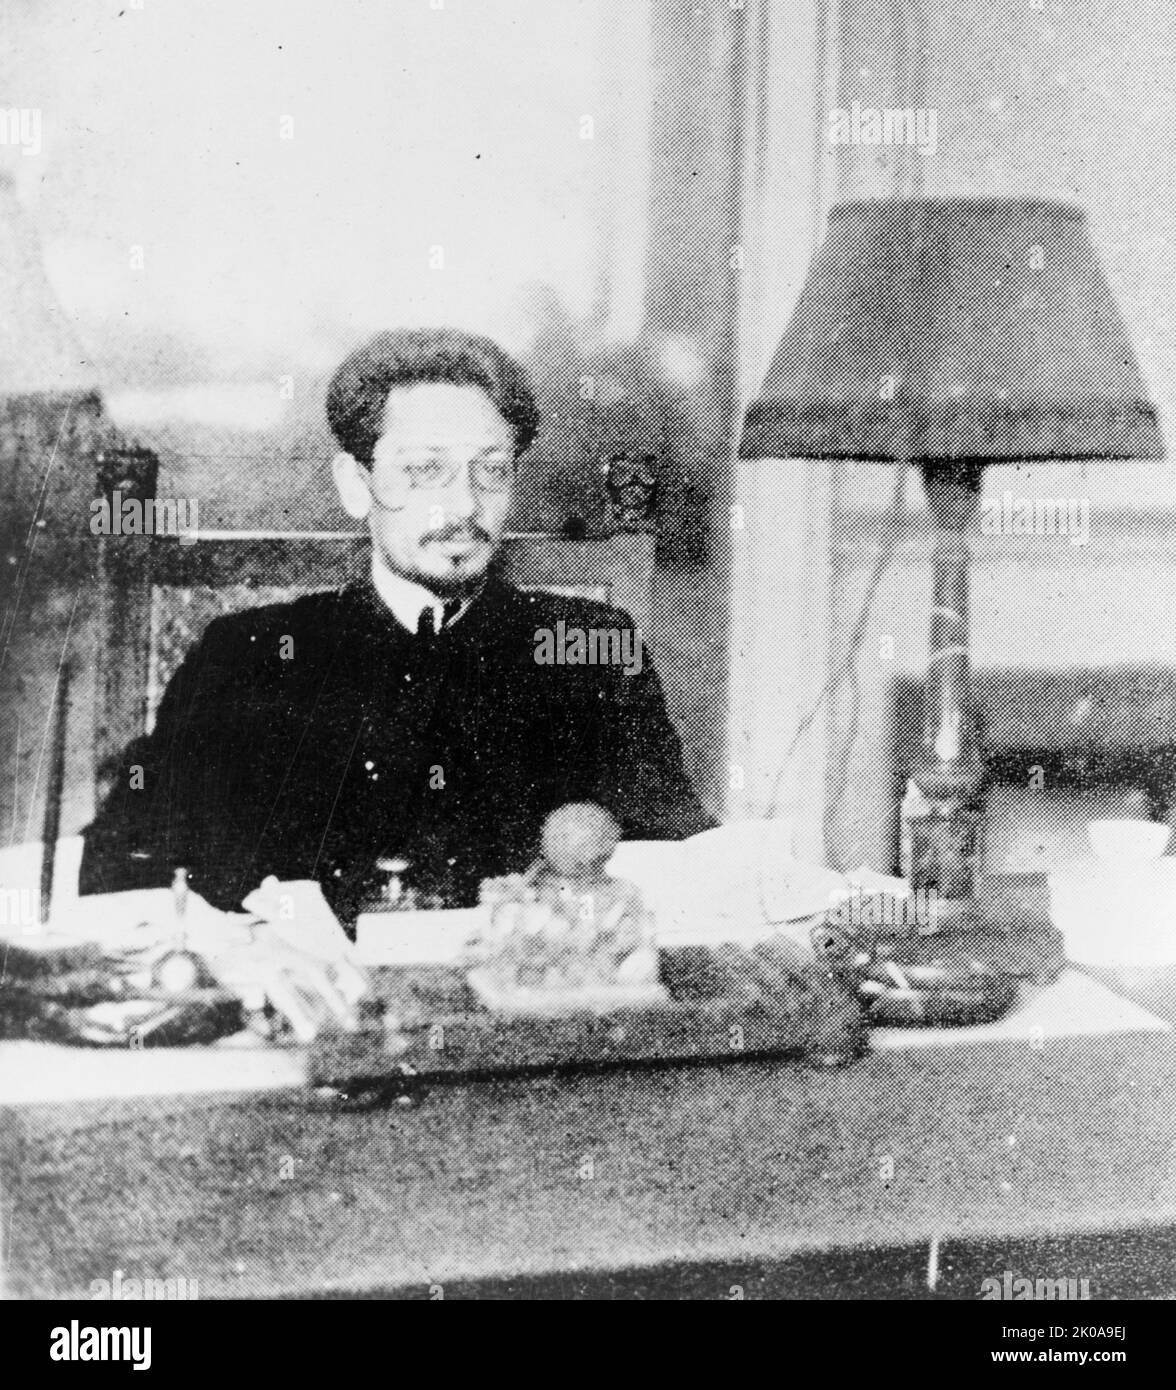 Yakov Mikhailovich Sverdlov (1885 - 16 March 1919) Bolshevik Party administrator and chairman of the All-Russian Central Executive Committee from 1917 to 1919. He is sometimes regarded as the first head of state of the Soviet Union, although it was not established until 1922, three years after his death. Stock Photo